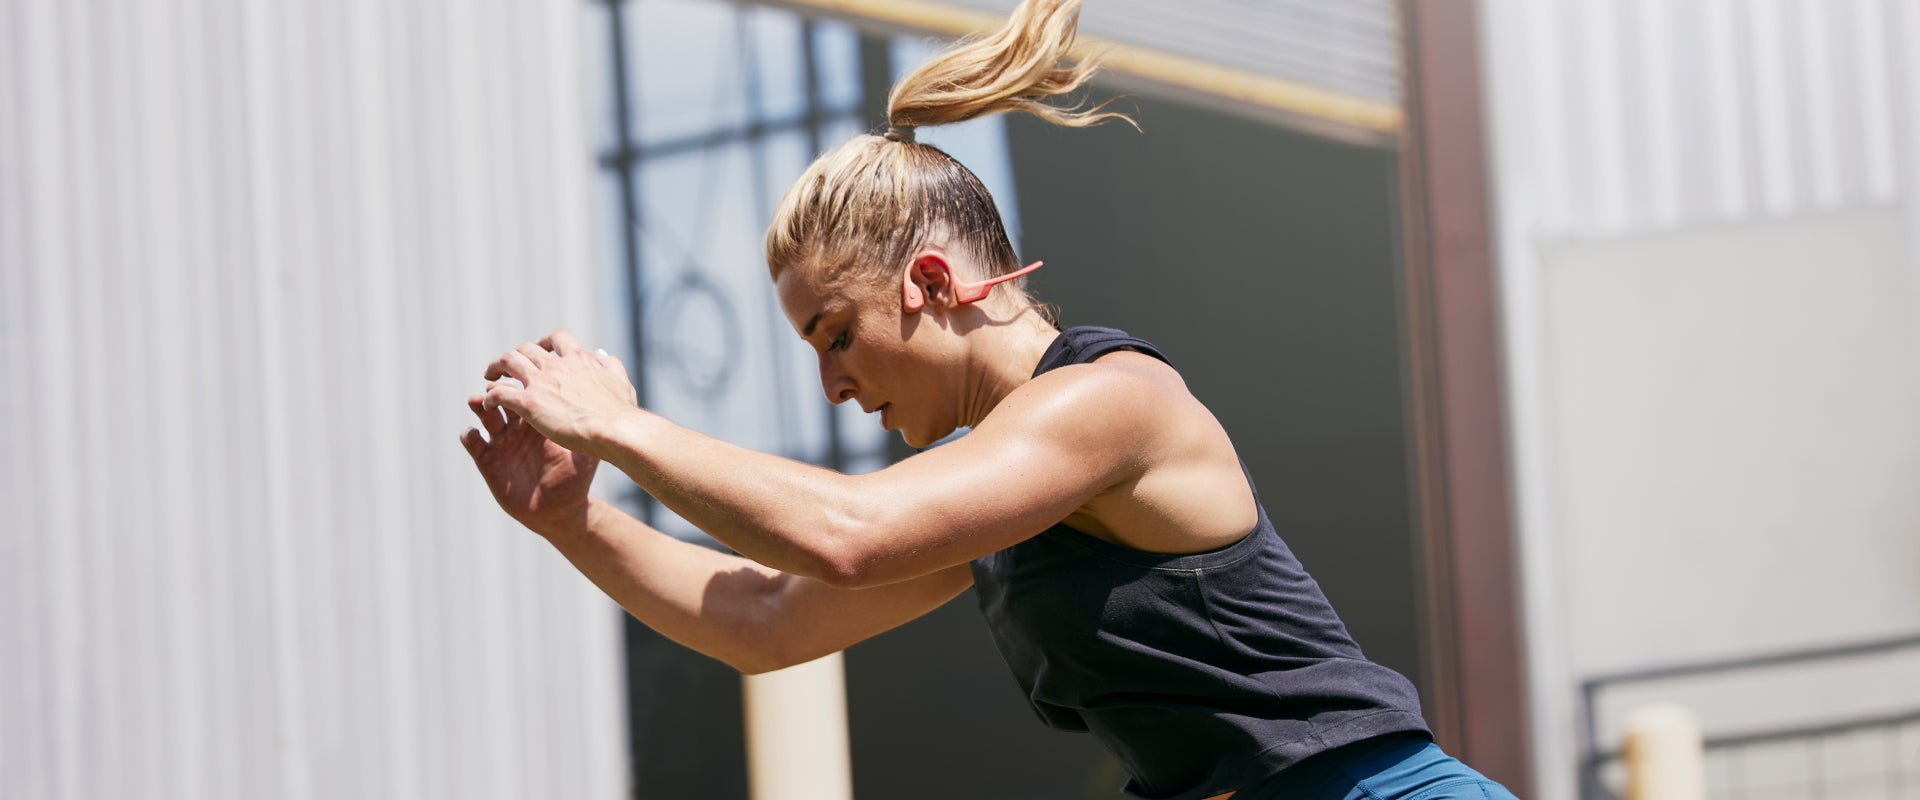 wireless headphones for workouts